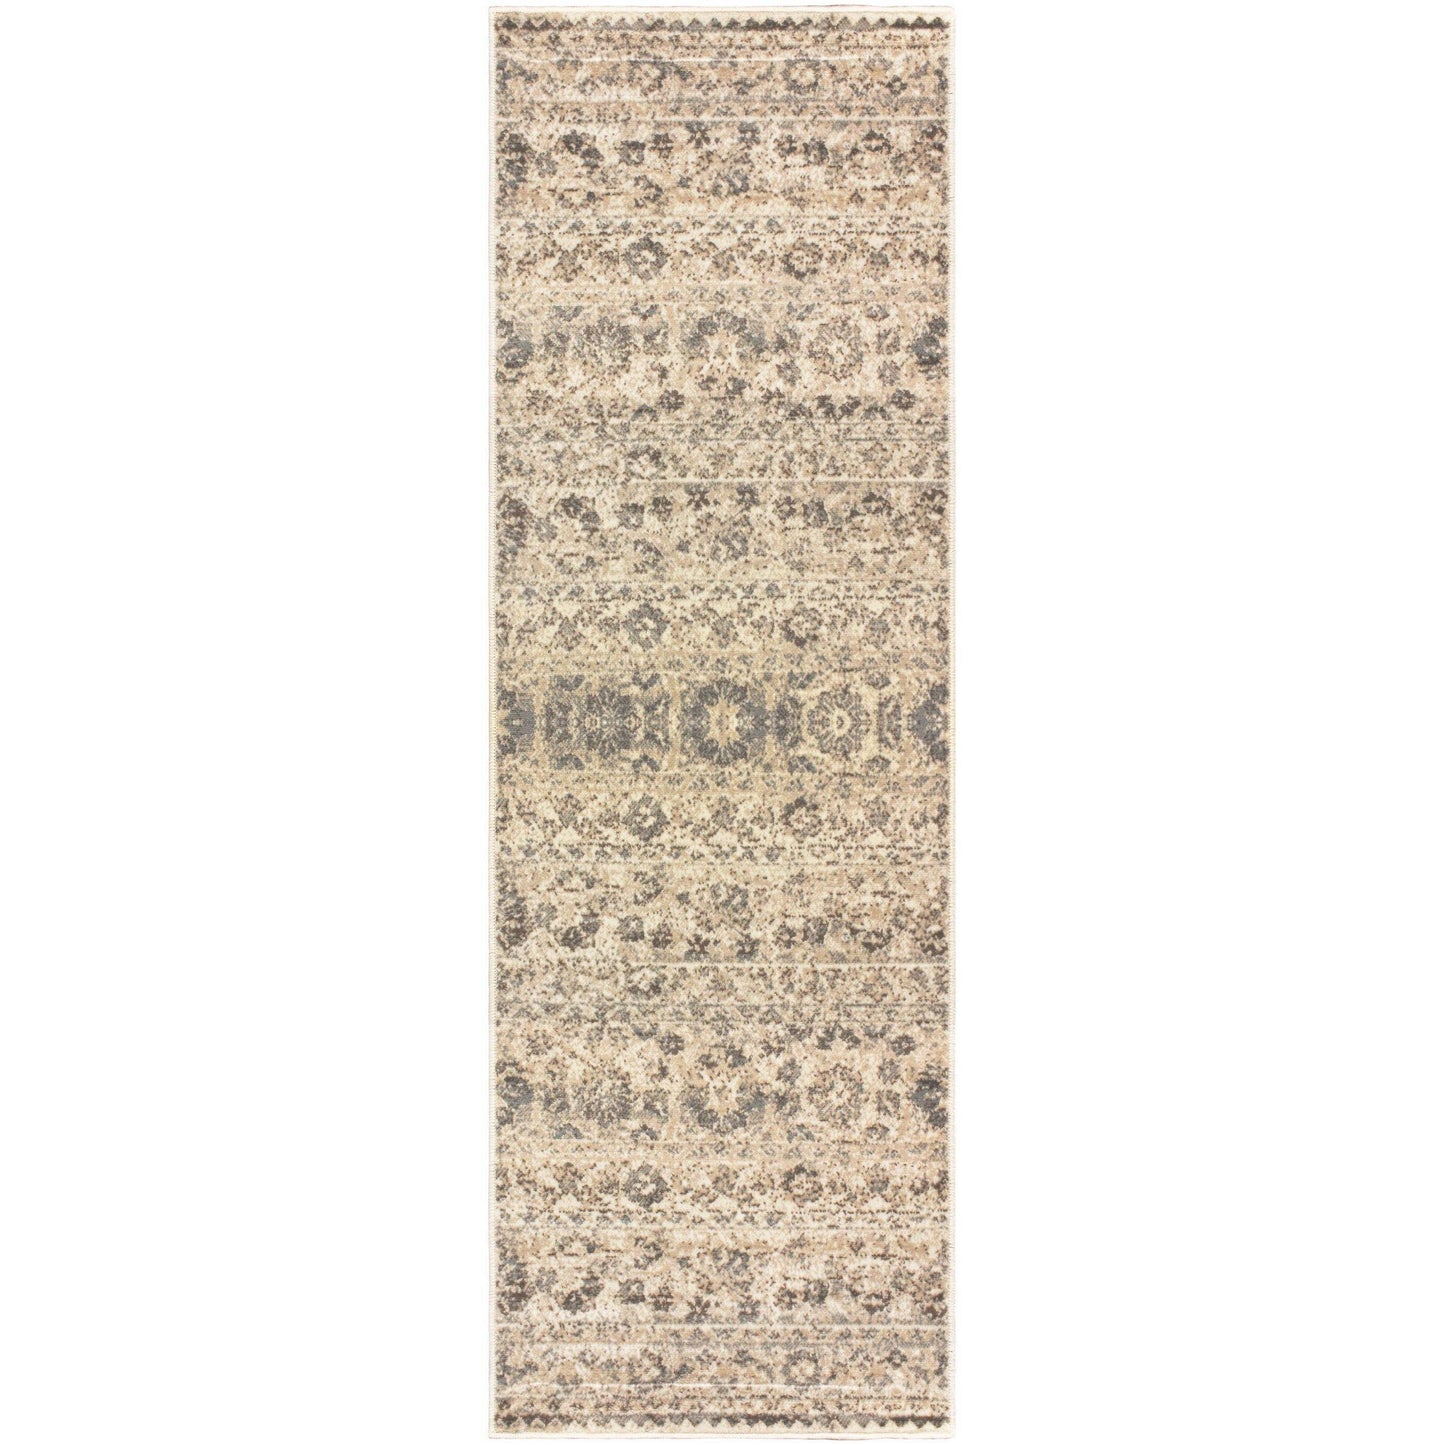 Fawn Vintage Distressed Floral Damask Rug FredCo